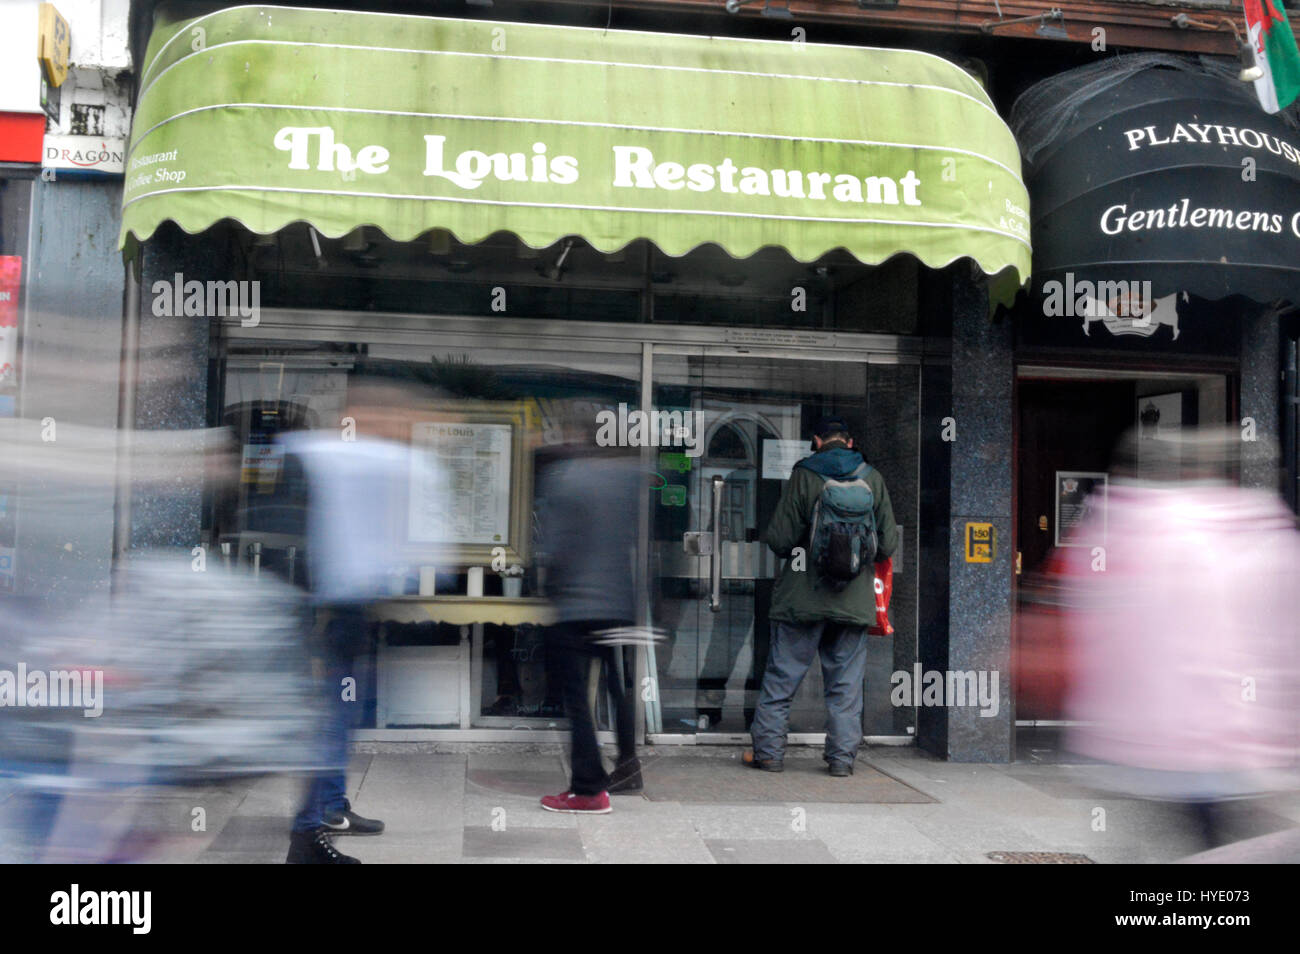 CARDIFF, UK. 16th February 2017. The Louis Restaurant on St. Mary’s Street closed overnight with no warning, and was effective immediately. This is ap Stock Photo